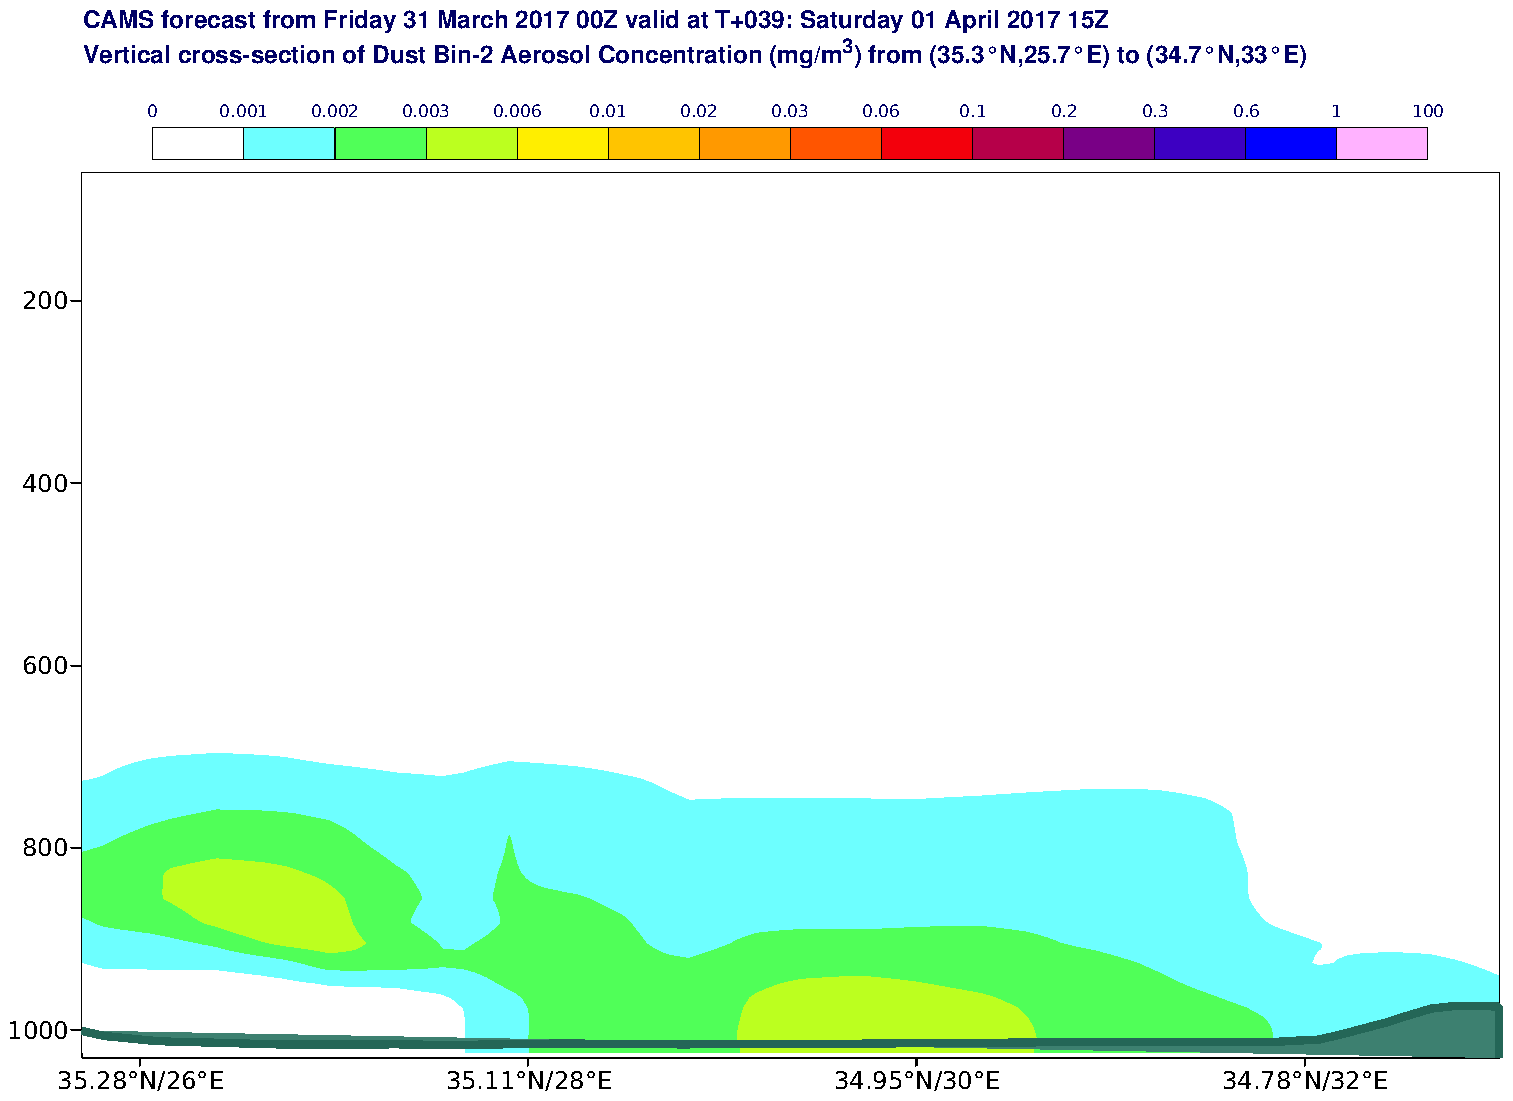 Vertical cross-section of Dust Bin-2 Aerosol Concentration (mg/m3) valid at T39 - 2017-04-01 15:00